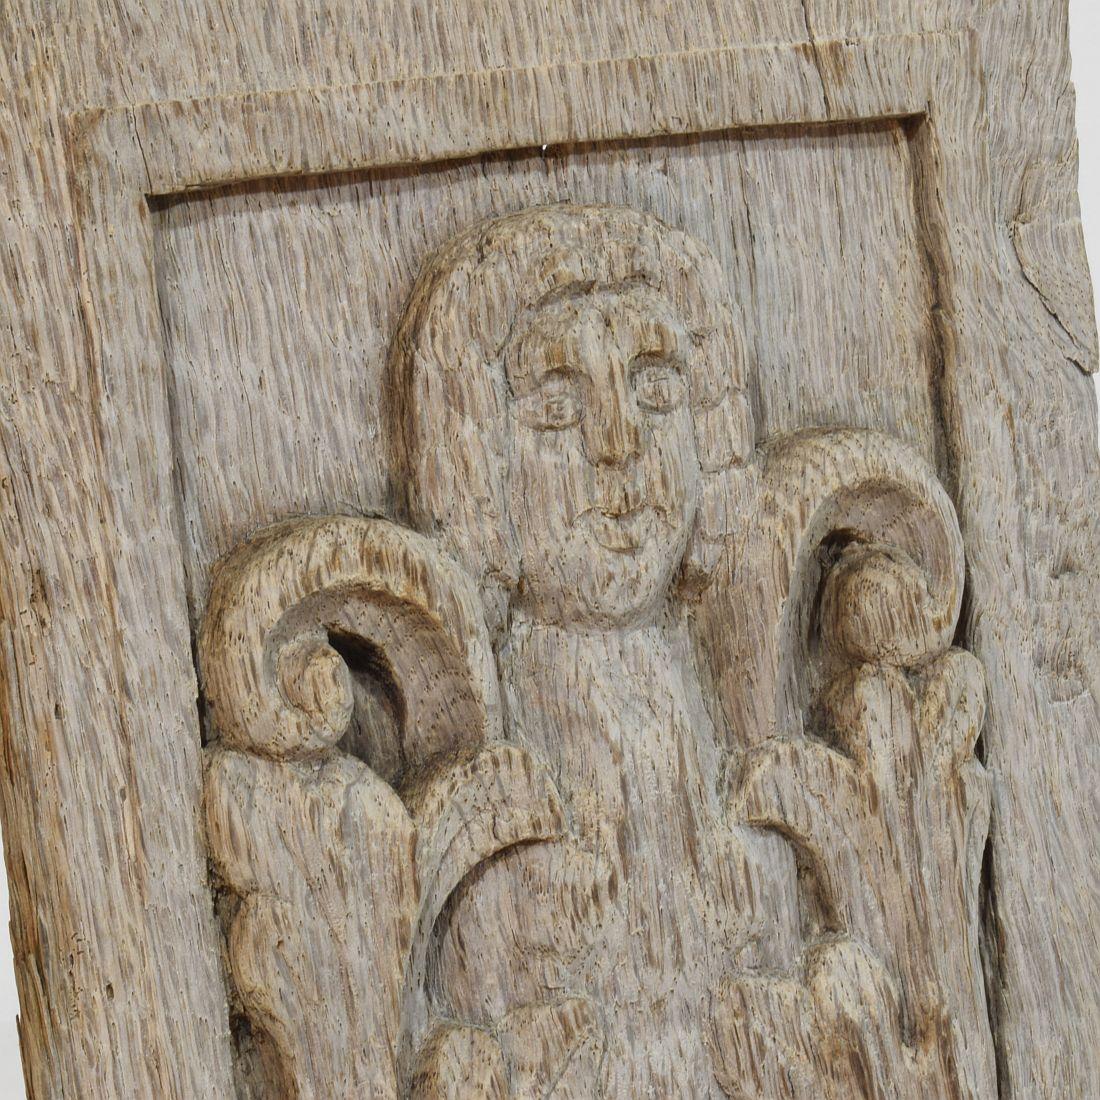 16th-17th Century French Carved Oak Panel with an Angel Figure For Sale 8